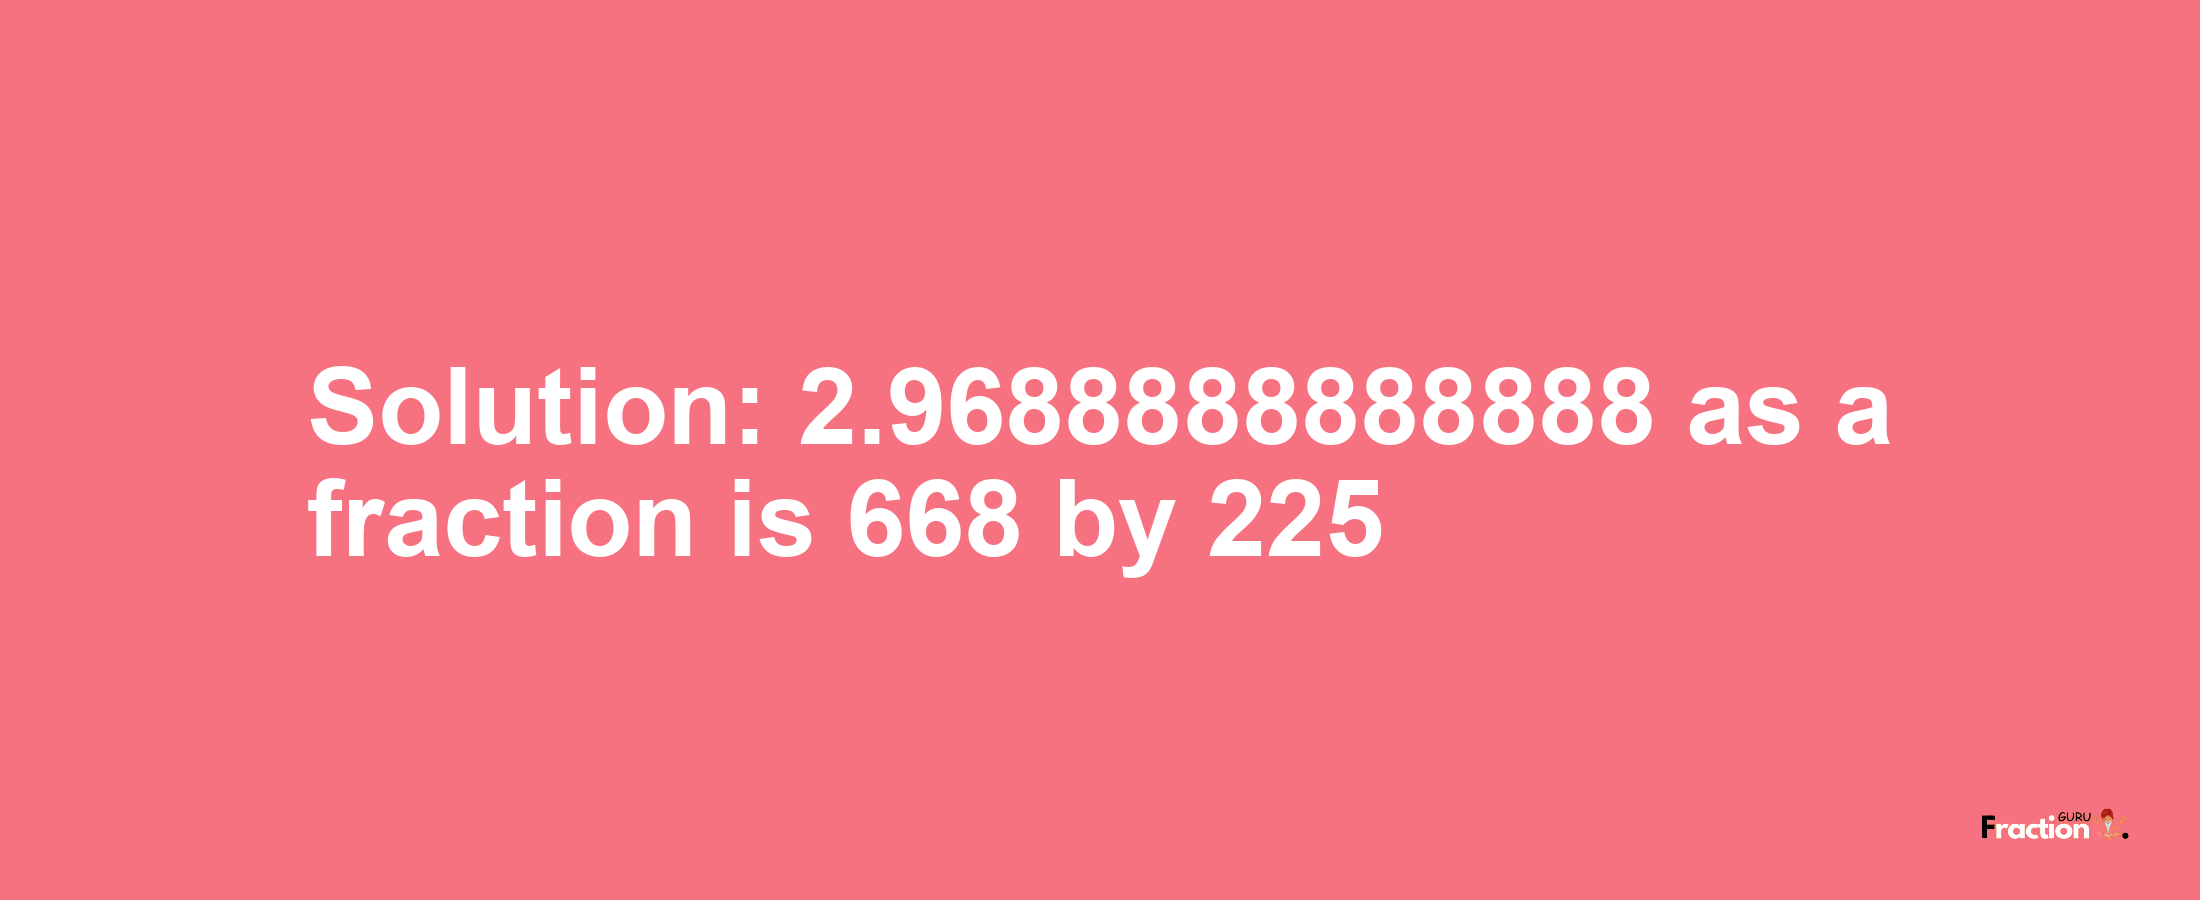 Solution:2.9688888888888 as a fraction is 668/225